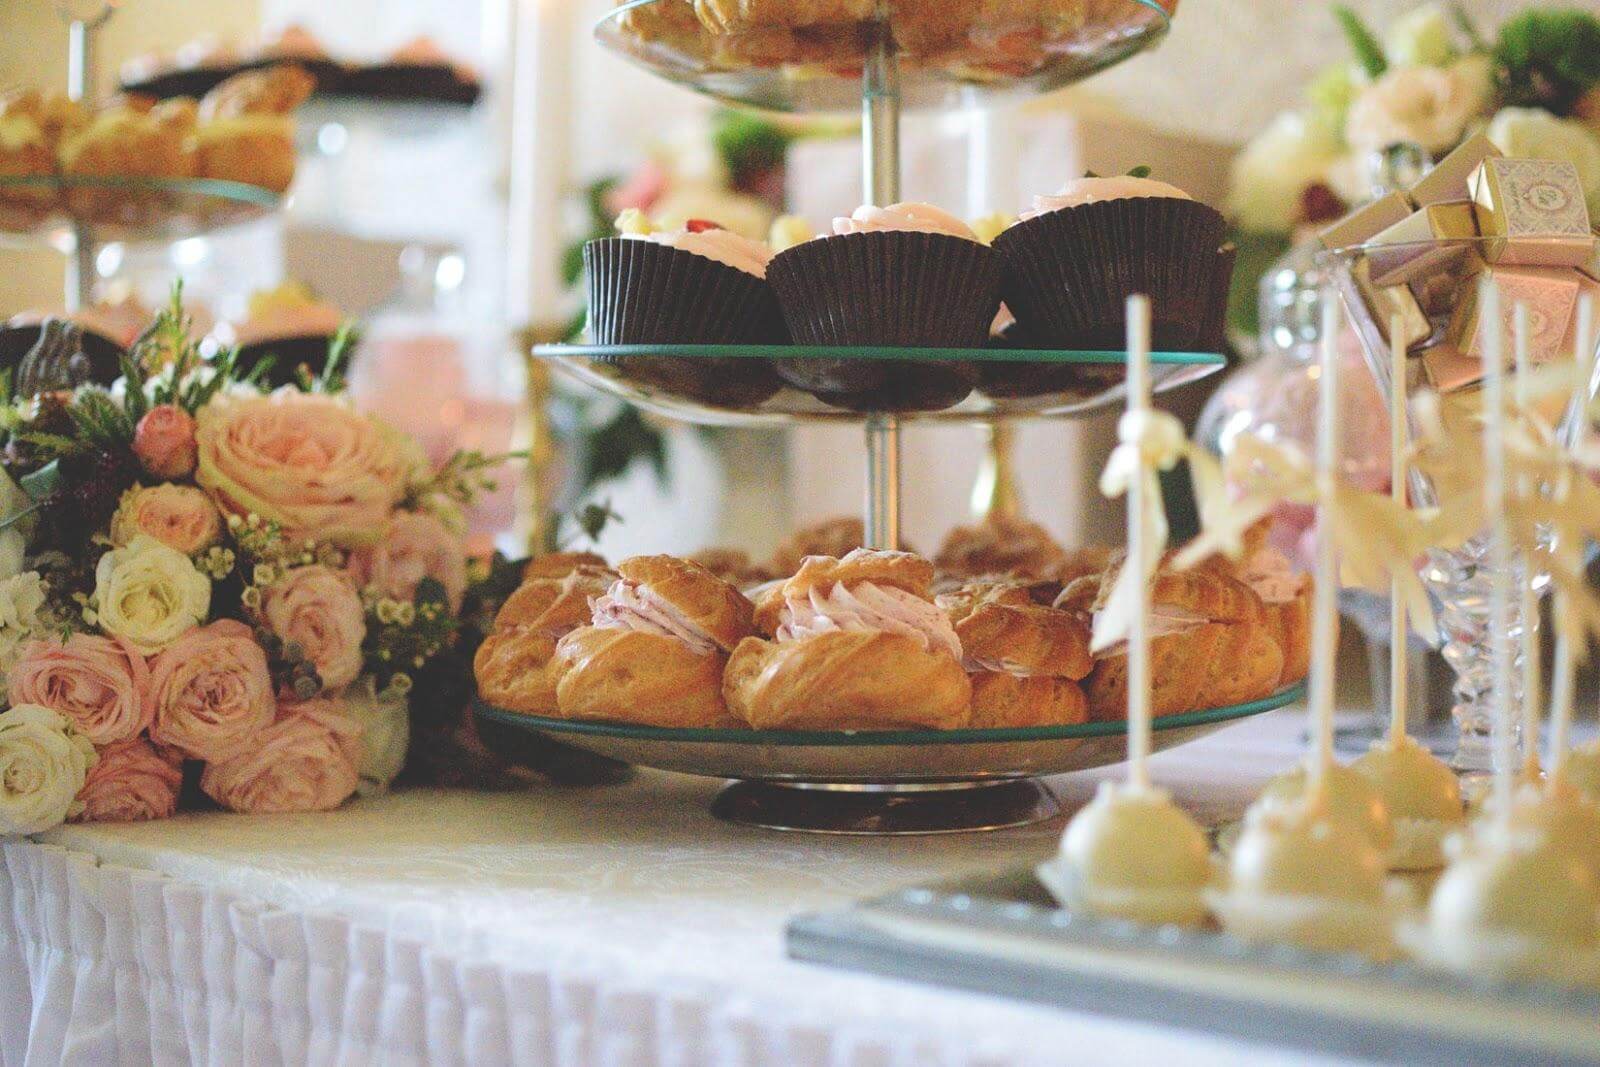 afternoon tea austin: 3-tiered stand